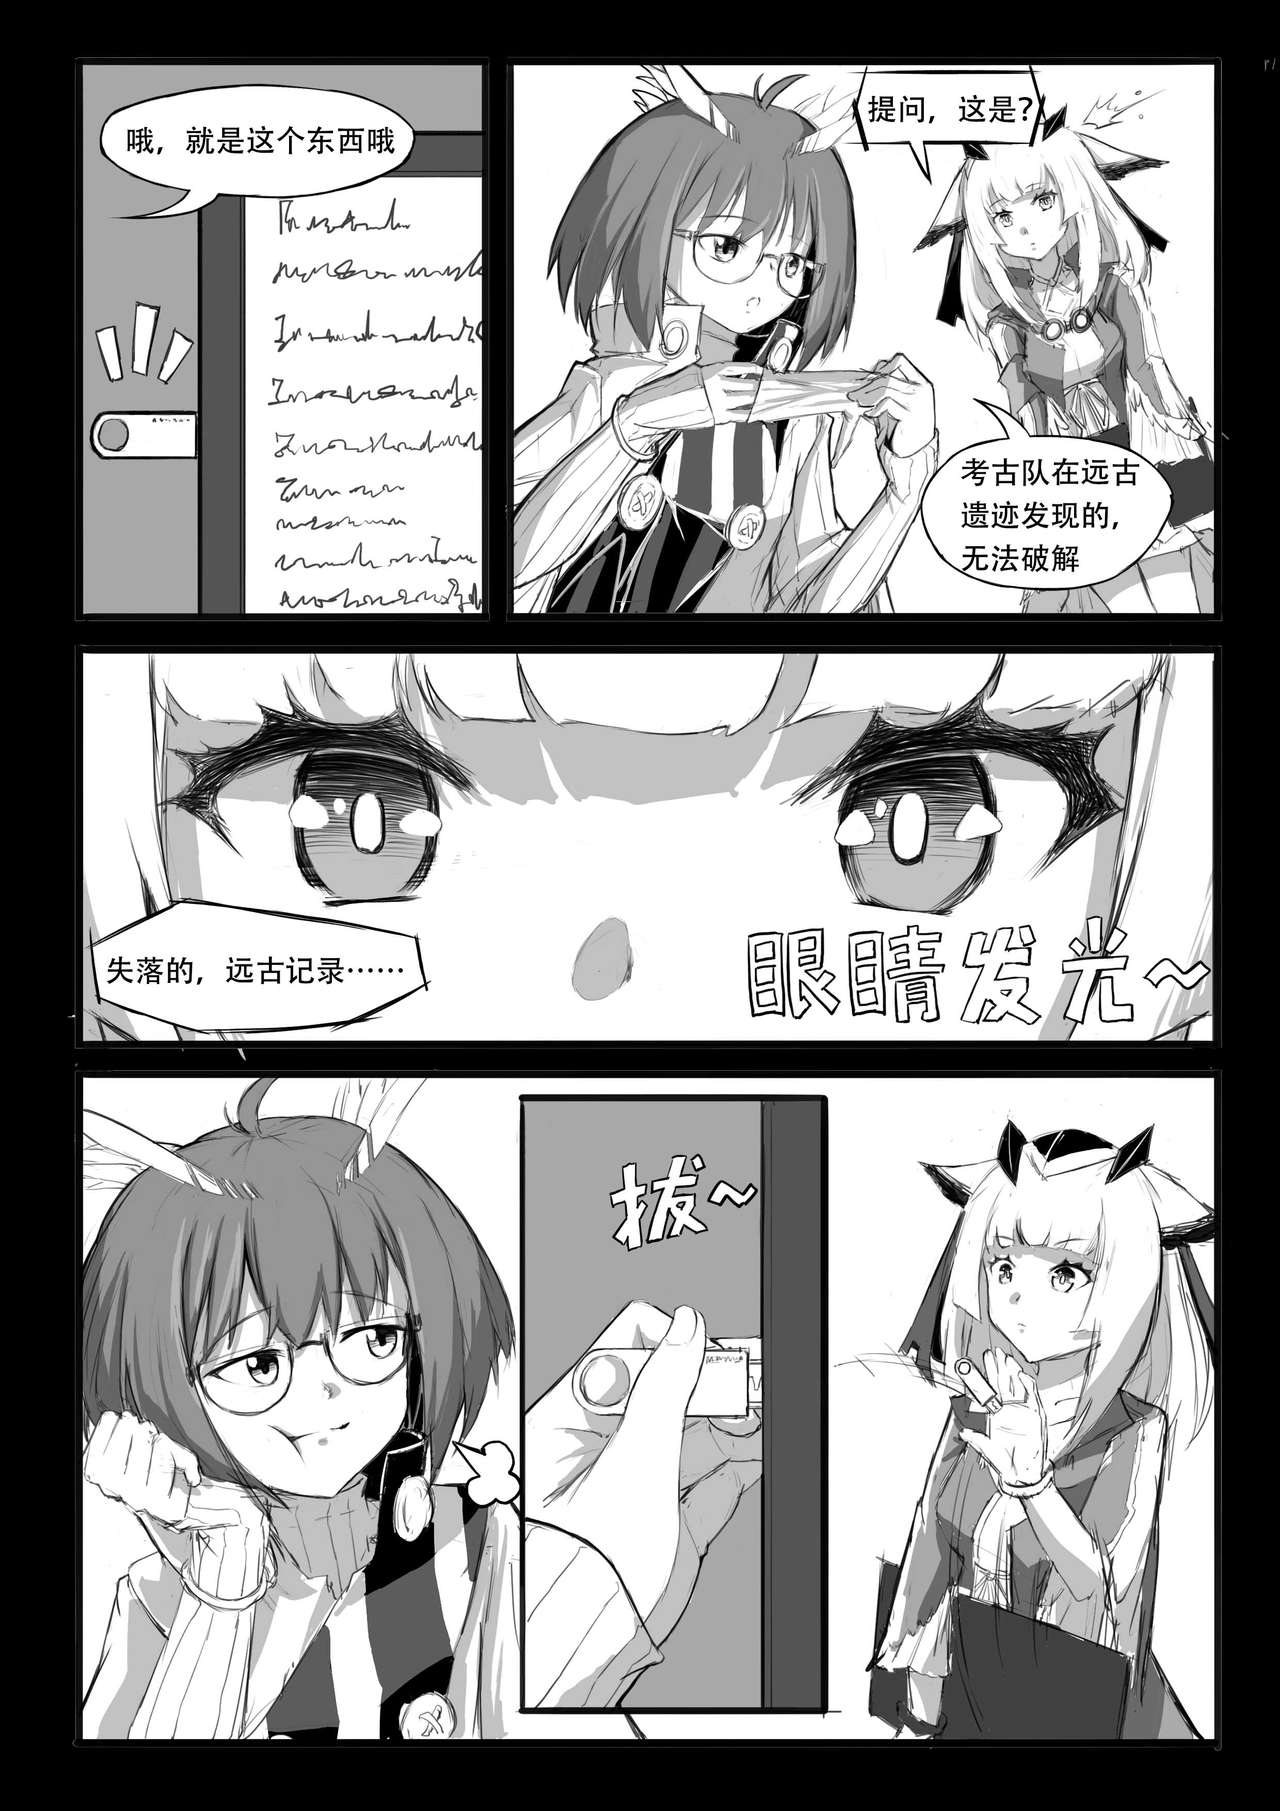 [saluky] 关于白面鸮变成了幼女这件事 (Arknights) [Chinese] page 3 full